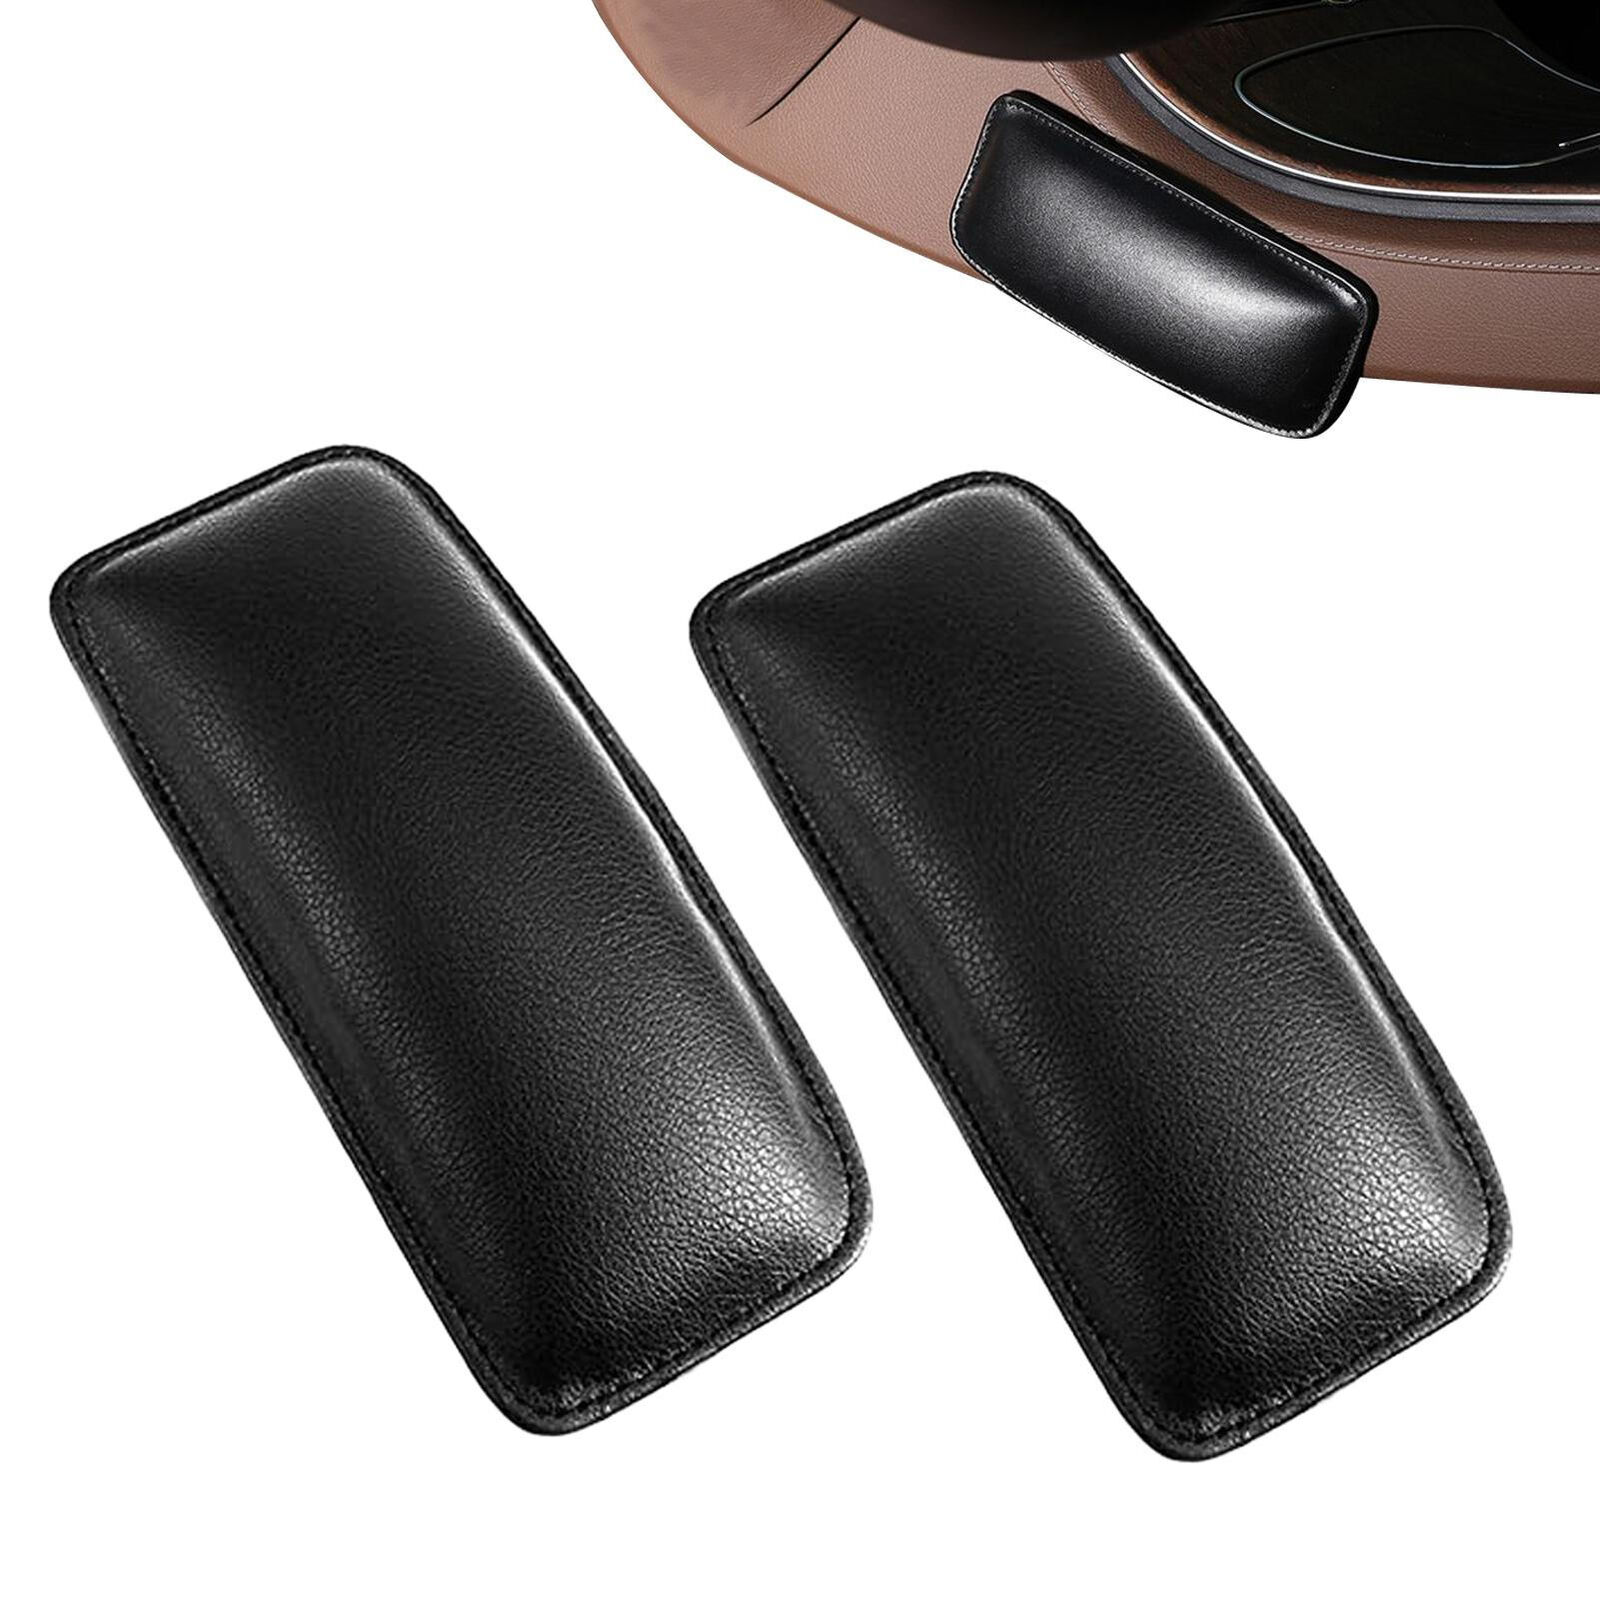 2pcs Car Center Console Knee PU Leather Pads Armrest Protective Cushion Support